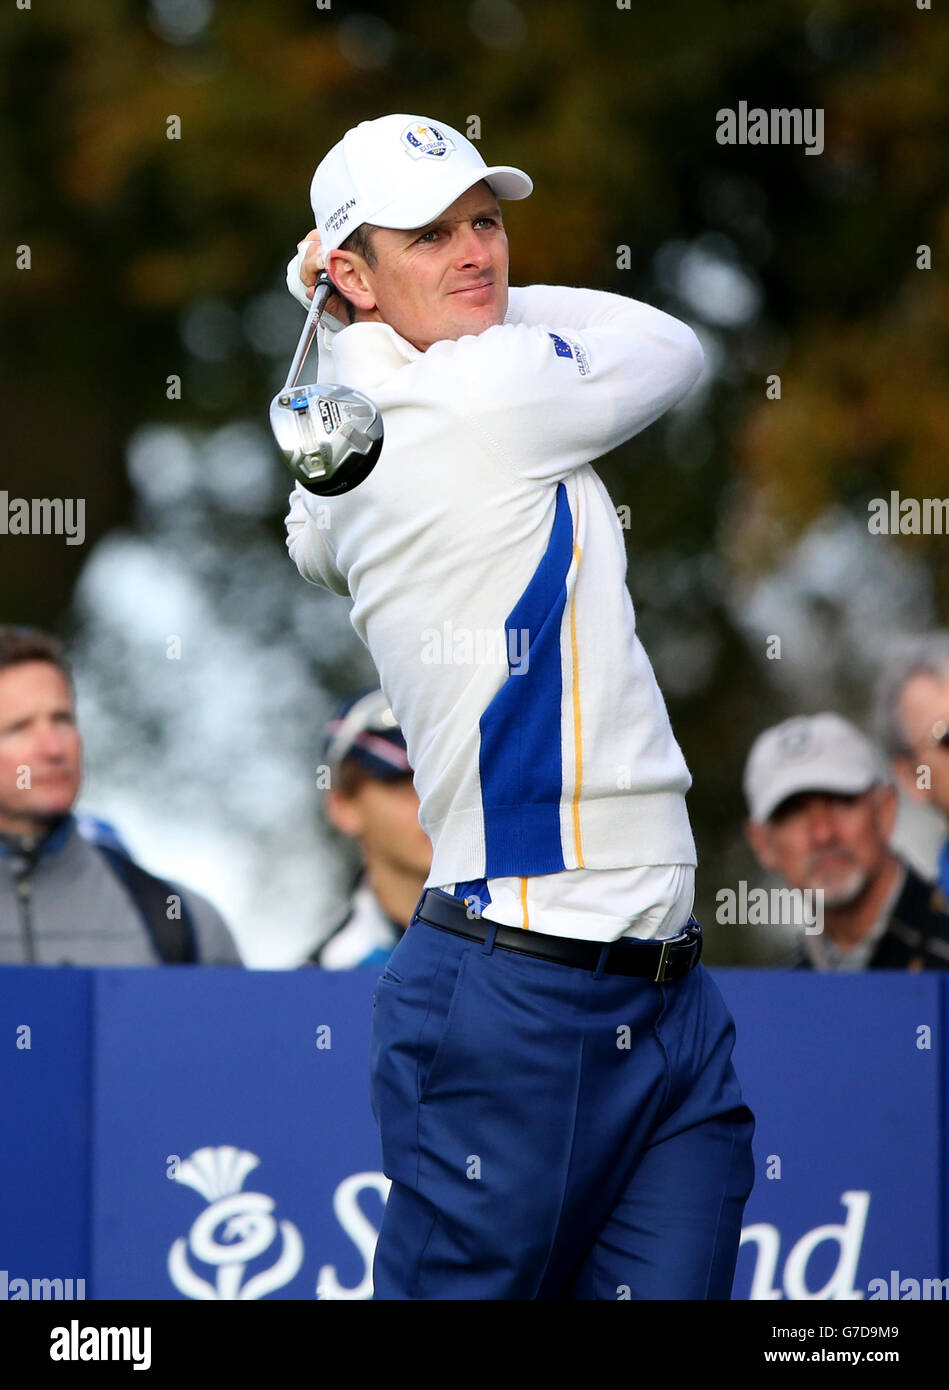 Golf - 40th Ryder Cup - Day Two - Gleneagles. Europe's Justin Rose during the fourballs Stock Photo